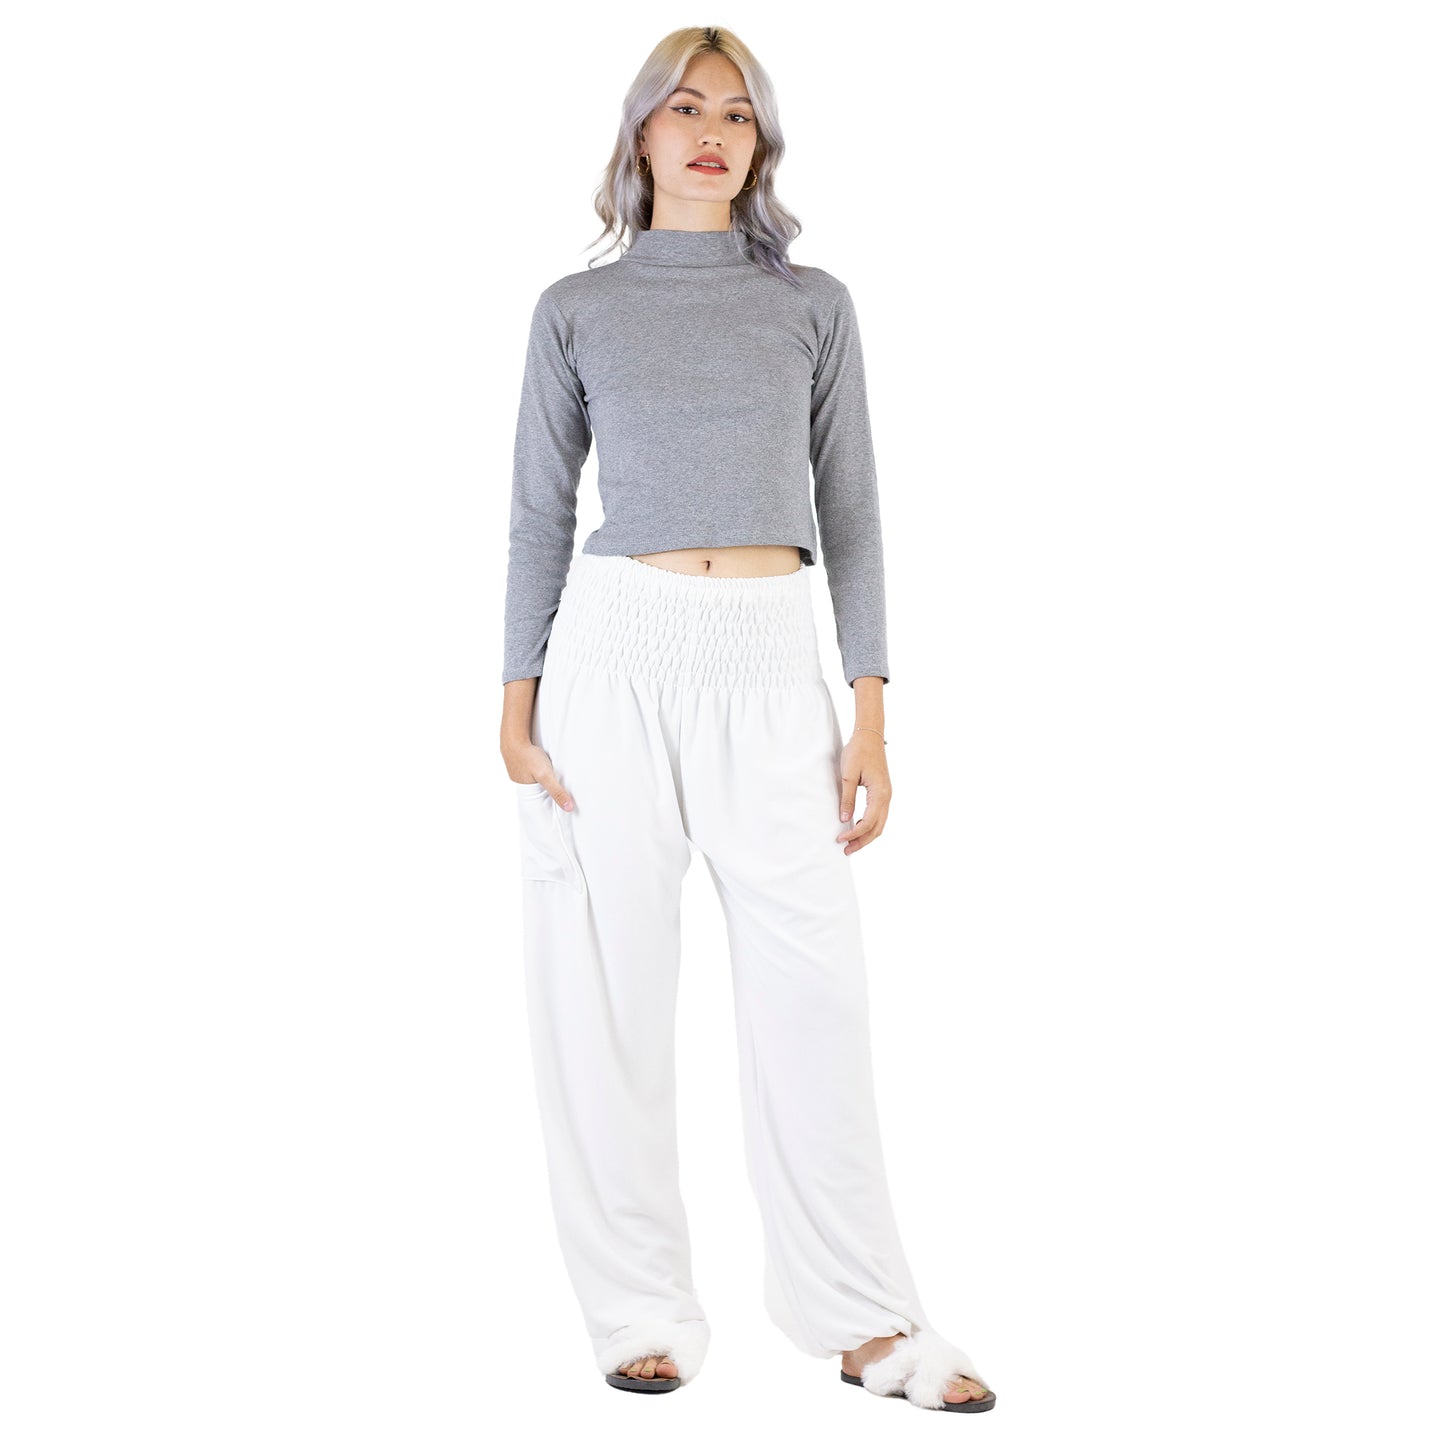 Solid Color Unisex Harem Pants Wool in White PP0004 080000 04